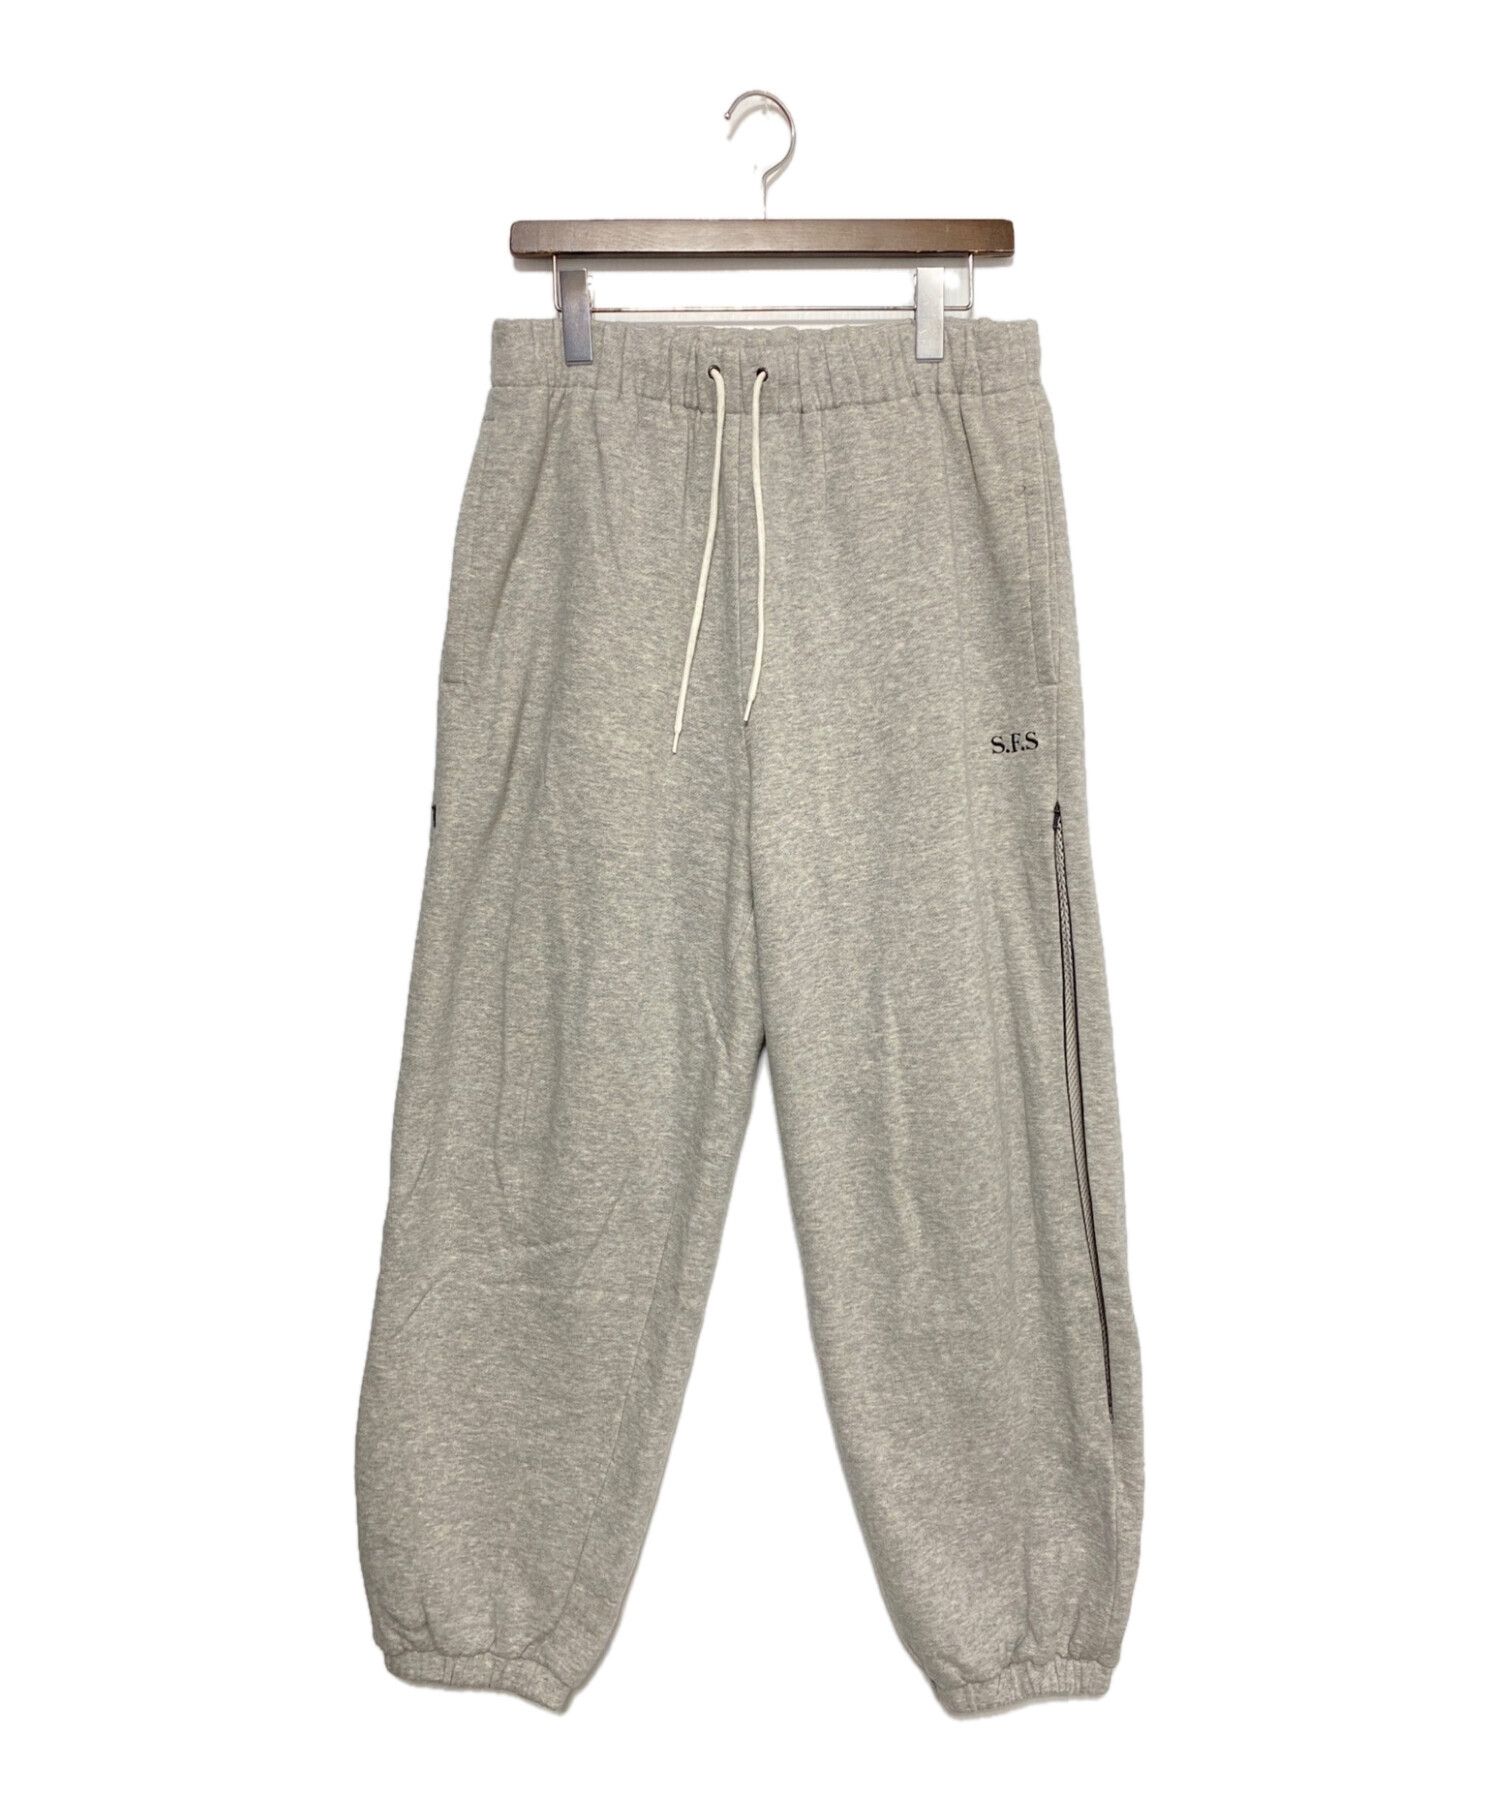 SALE／90%OFF】 Private brand by S.F.S Sweat Pants agapeeurope.org